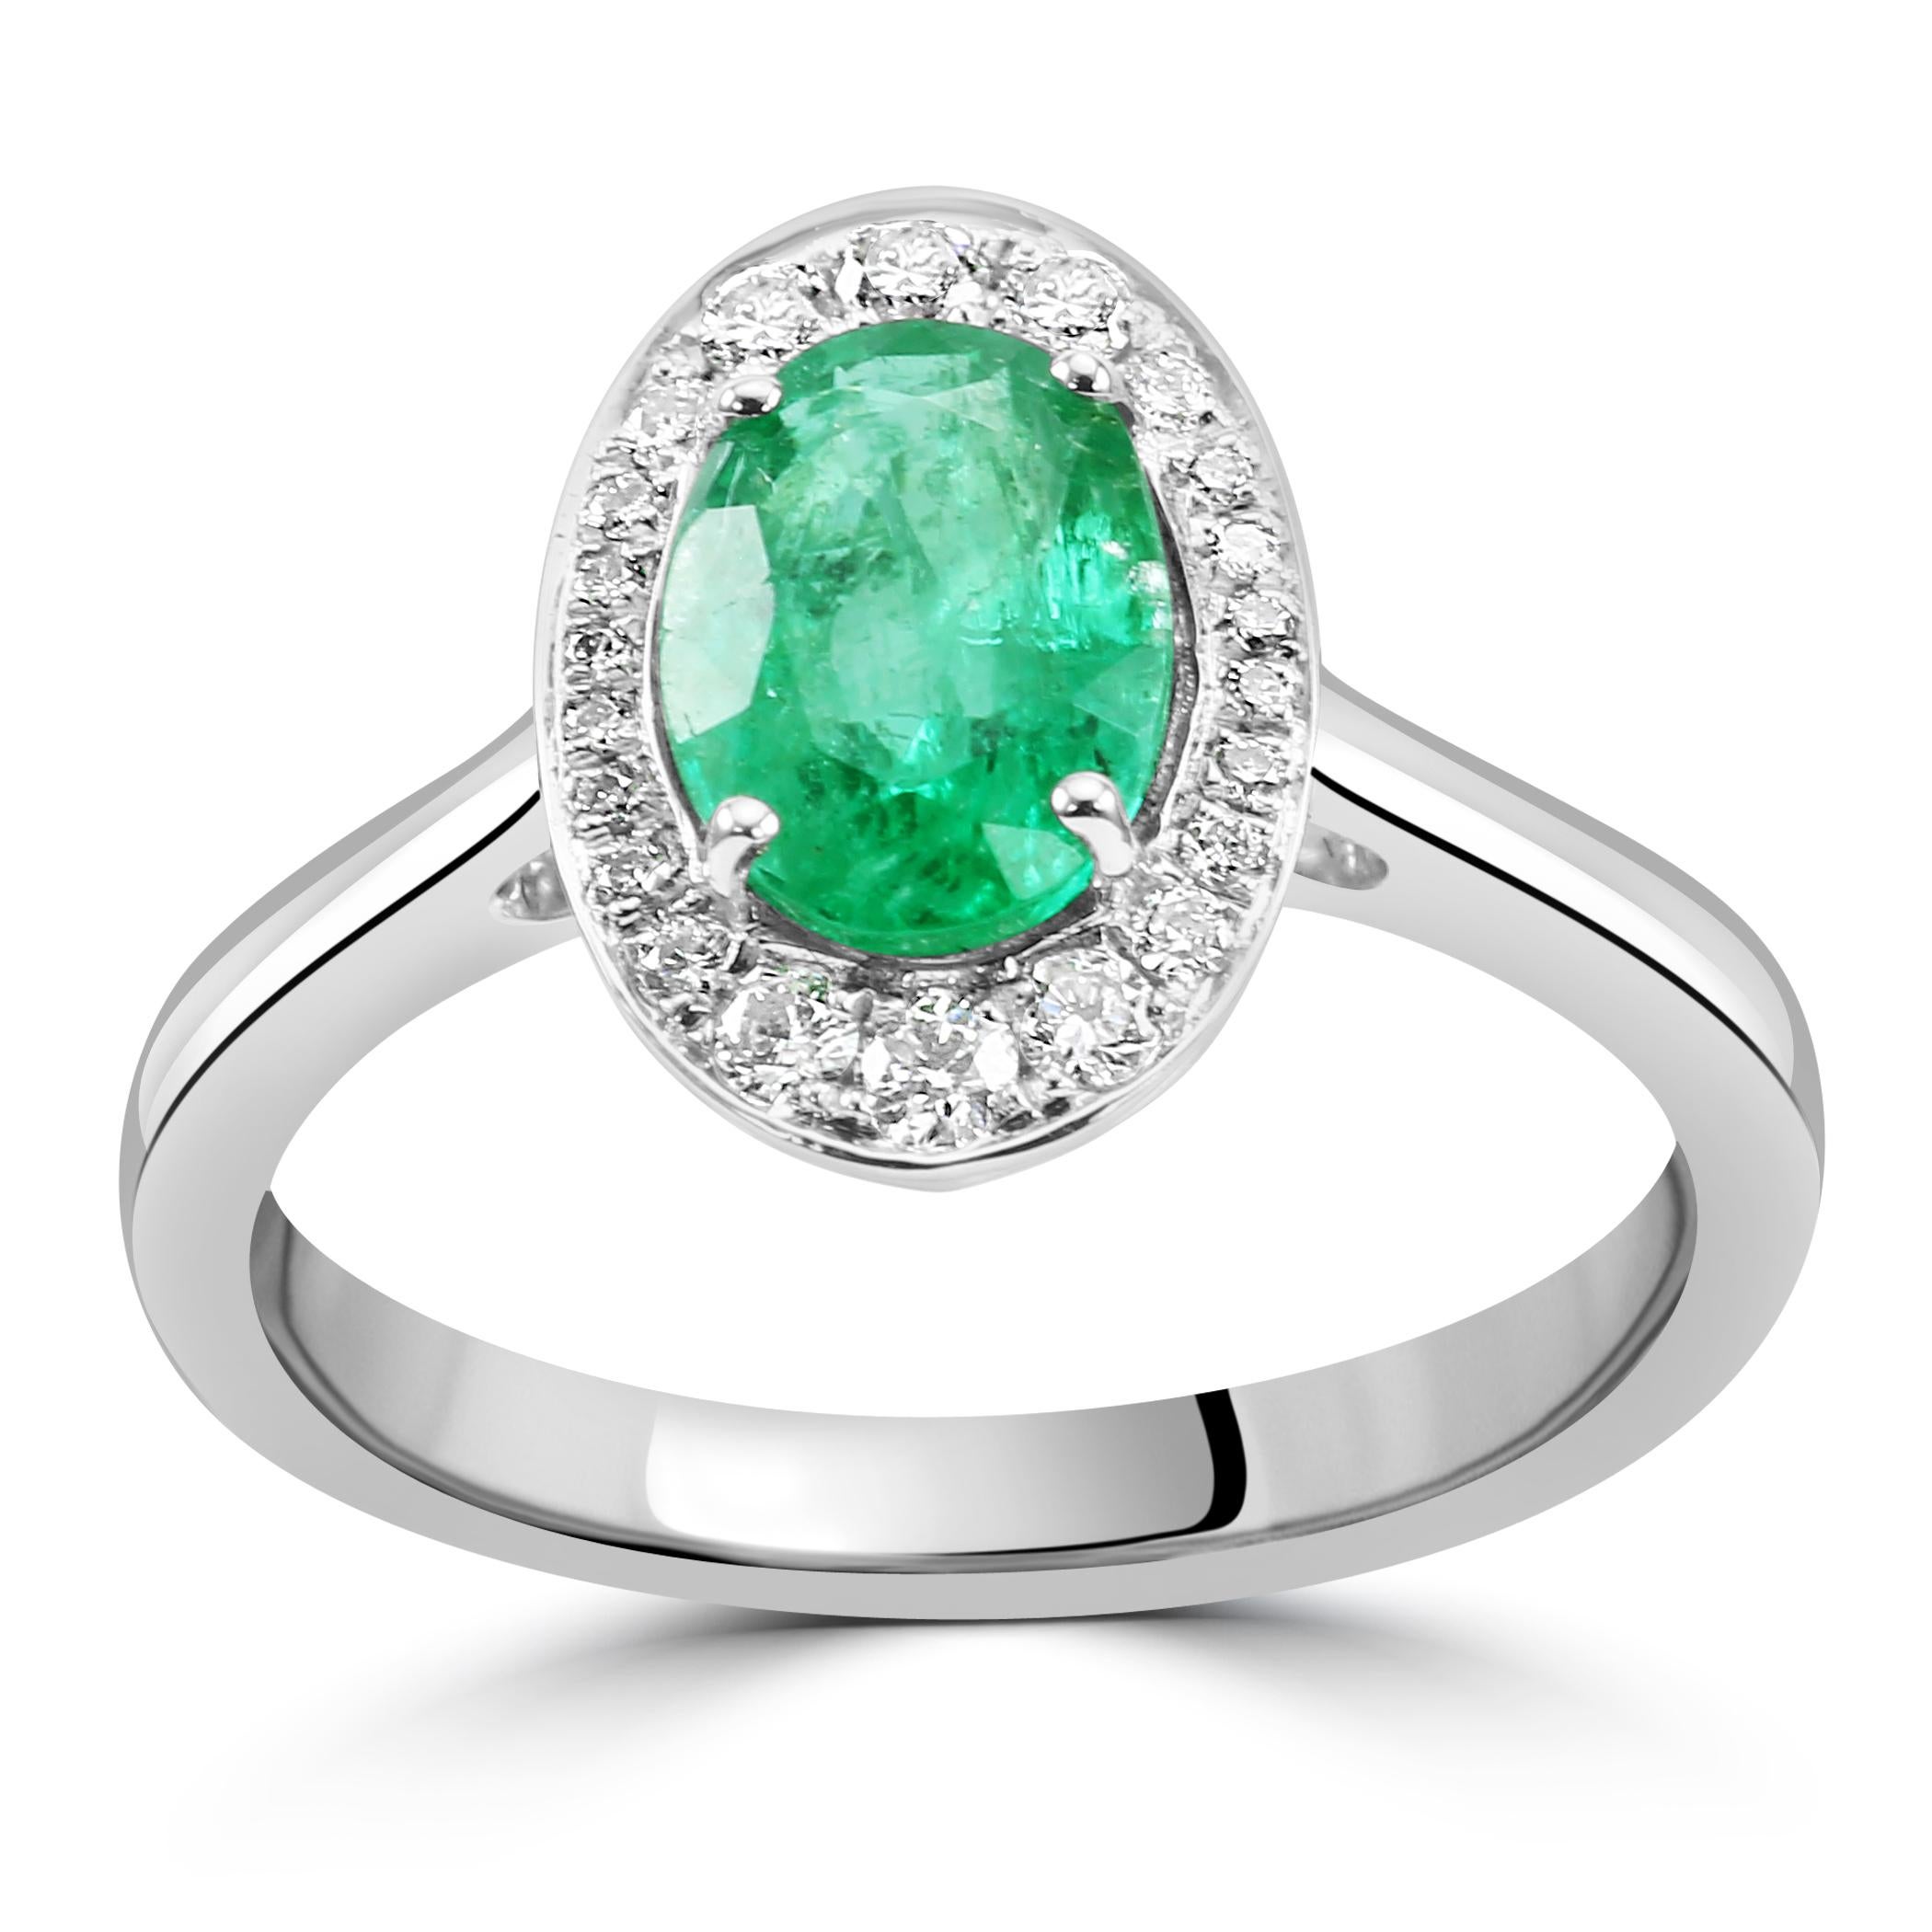 The focal point of the ring is the stunning Oval-Shaped Emerald, chosen for its rich color and graceful shape. With a weight of 1.2 carats, the emerald exudes a lush green hue, symbolizing renewal and abundance.

Encircling the emerald like a halo